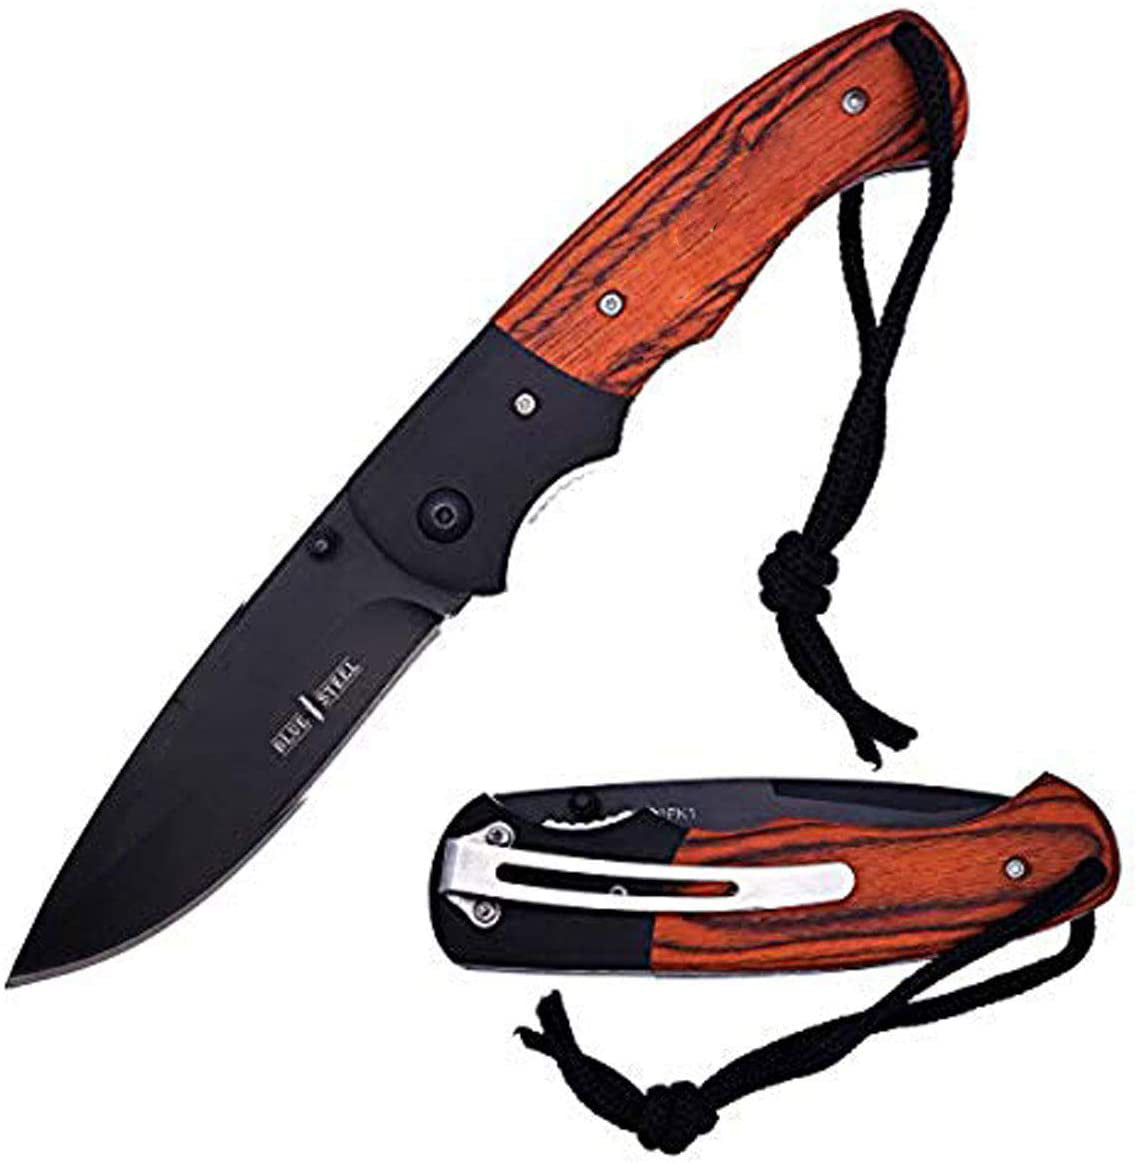 Stainless Steel Pocket Knife with Wood Insert - 14-in-1 Multi-Function